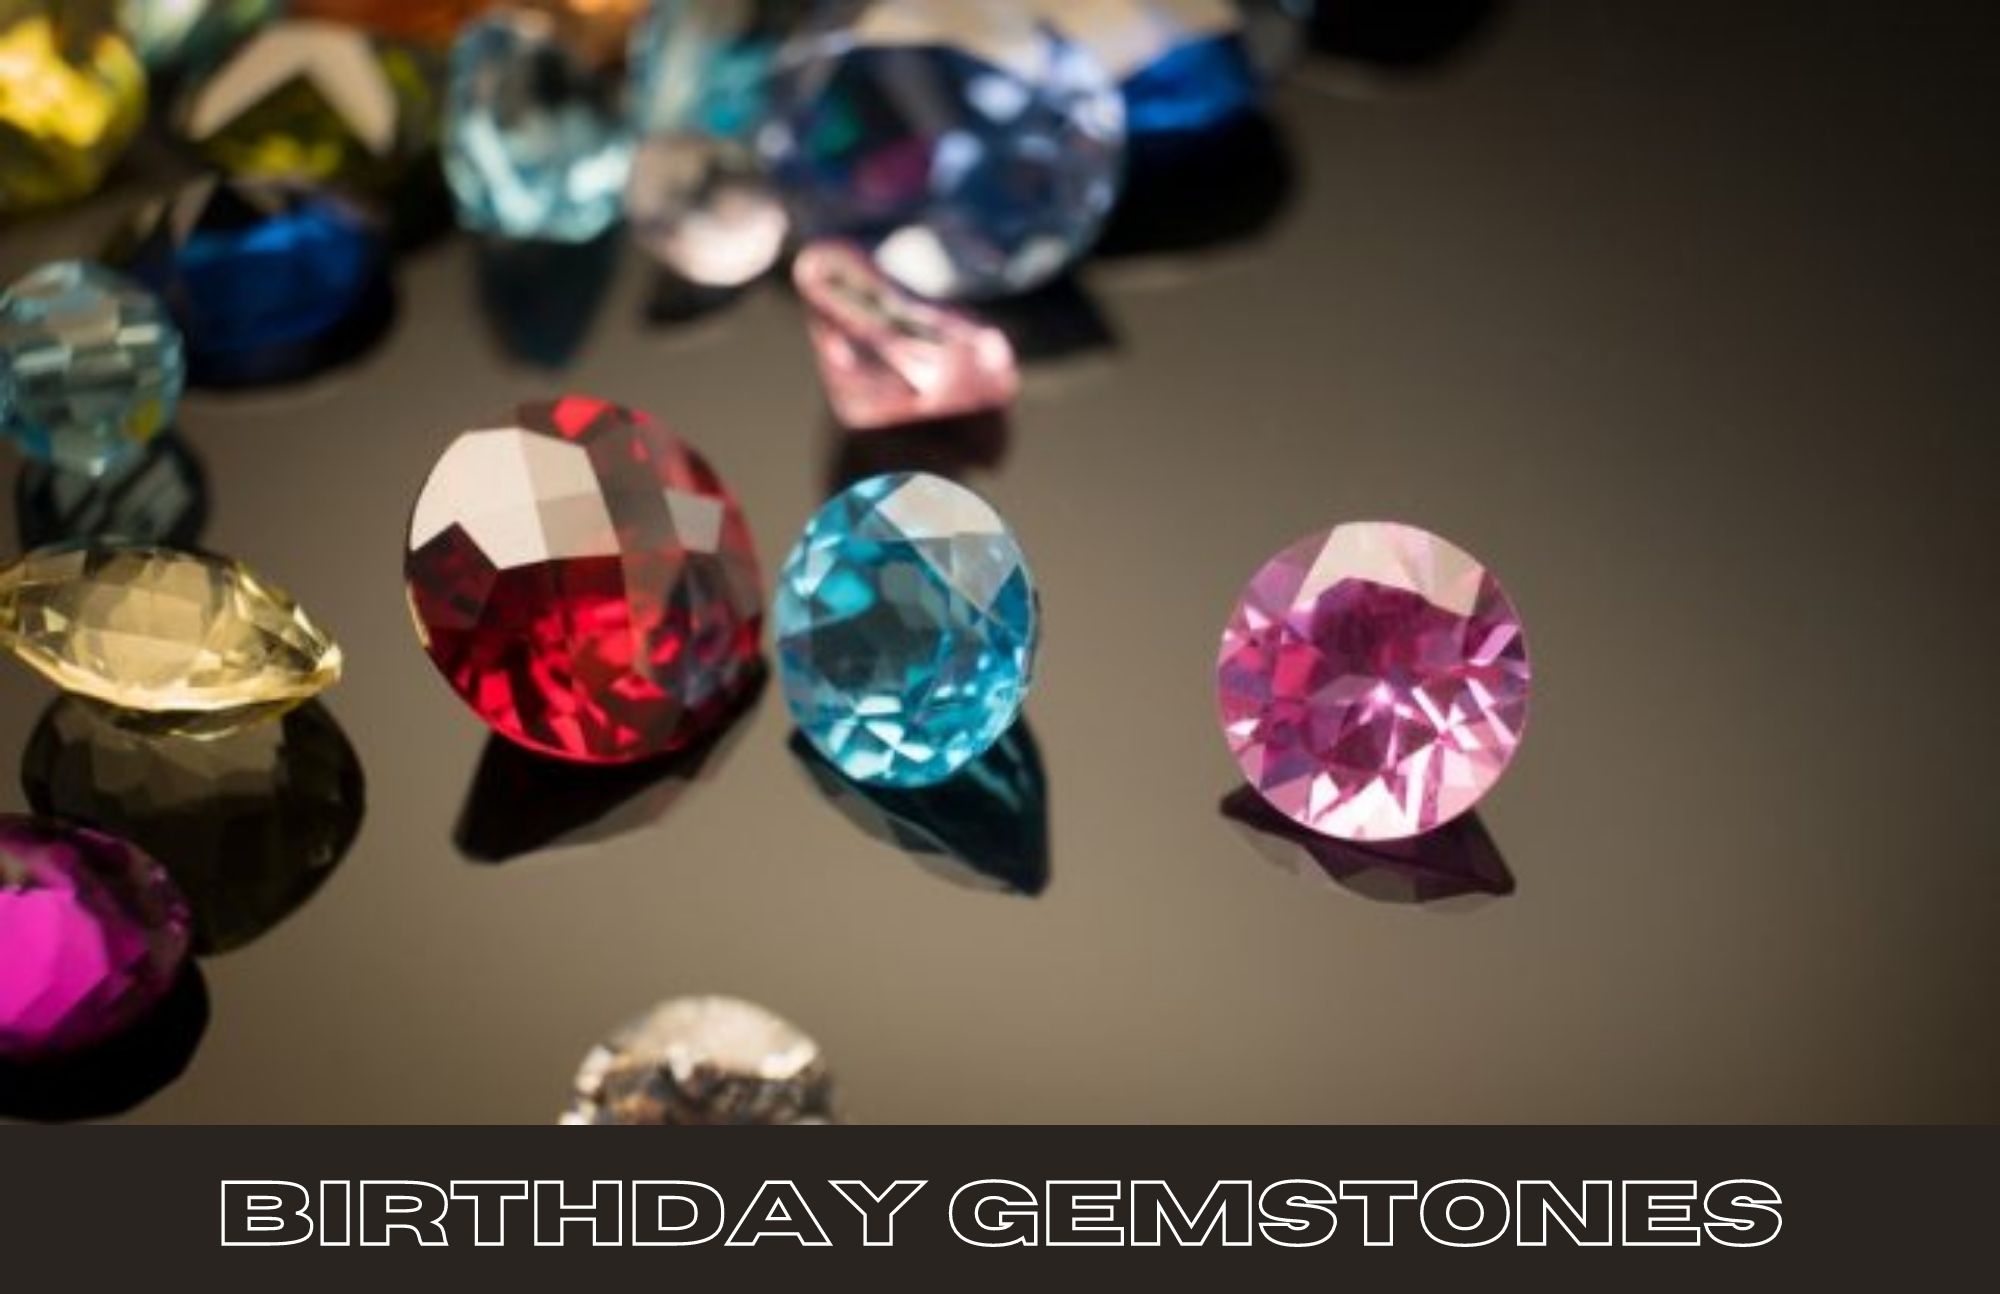 Birthday Gemstones - What Gemstones Are Associated With Your Birthday